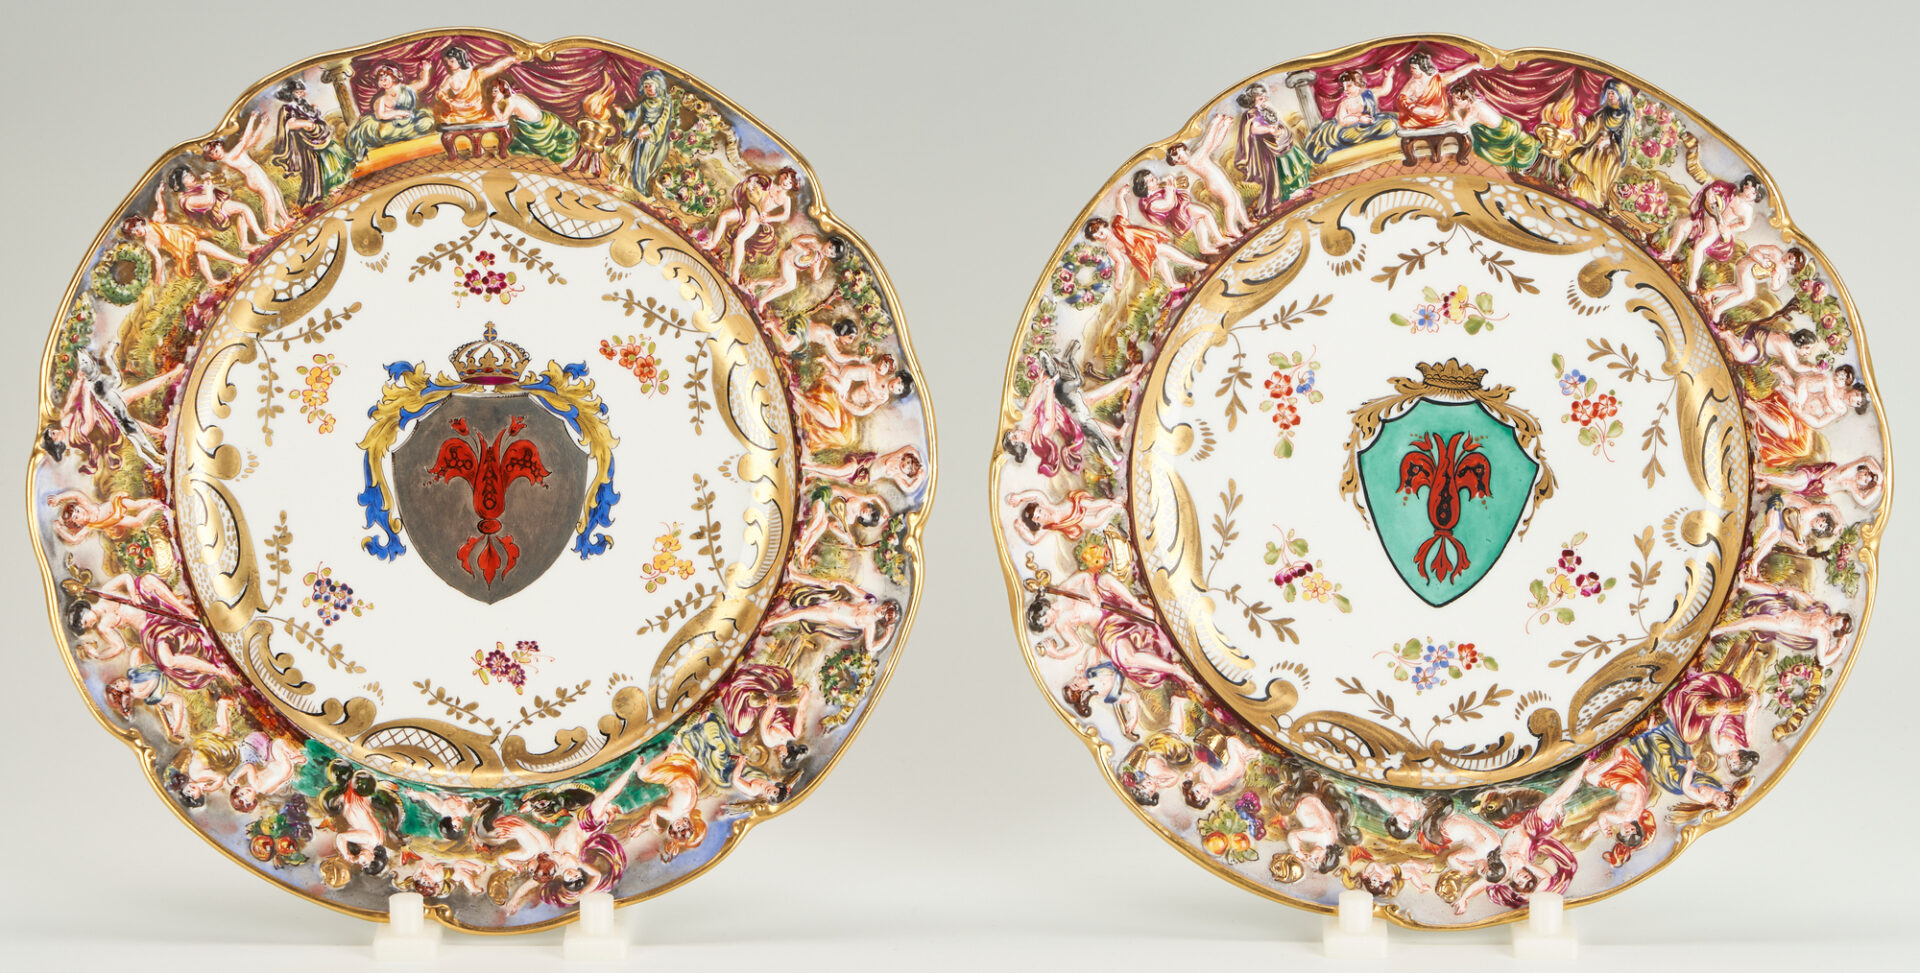 Lot 912: 17 Pcs. Capodimonte-Style Armorial Porcelain Dinner Plates or Chargers